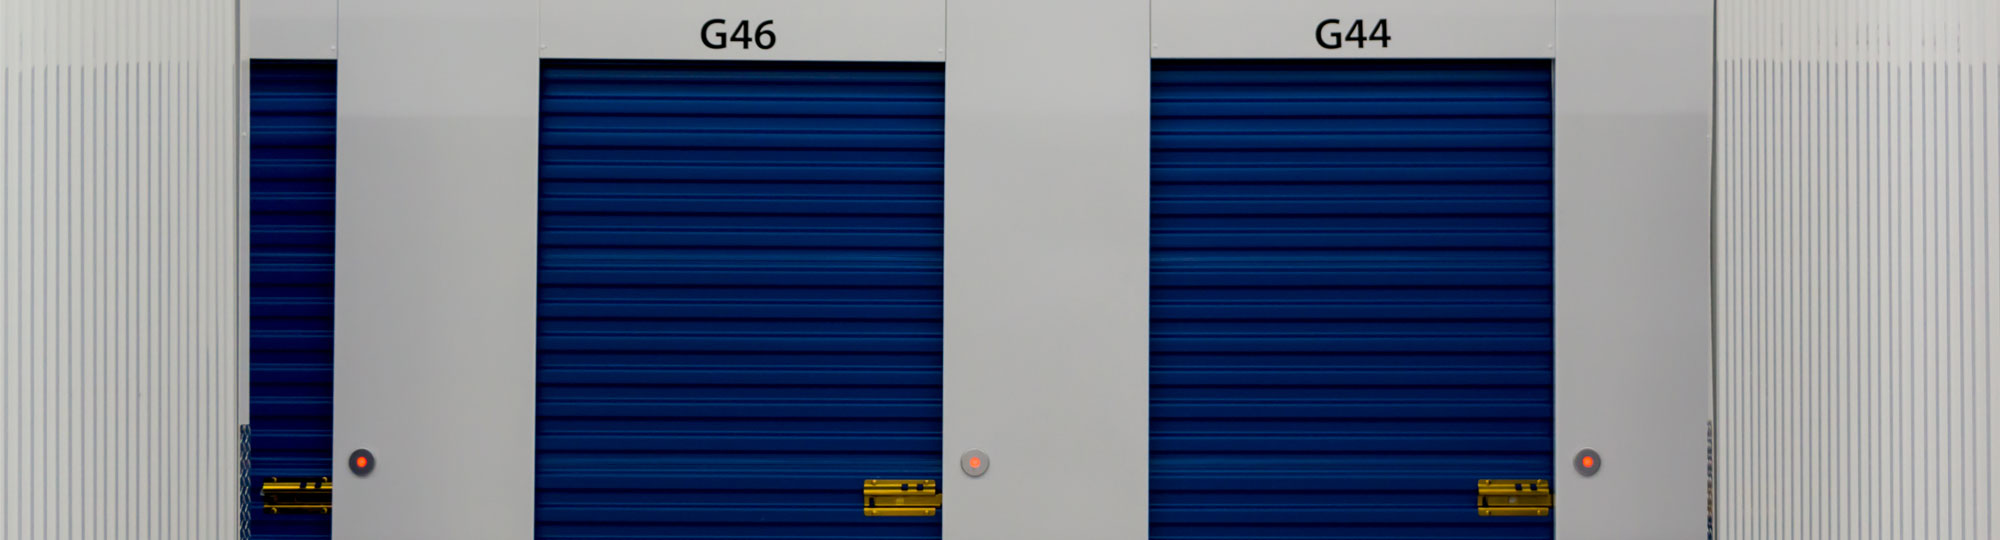 Storage units with Noke Smart Entry locks and swing doors